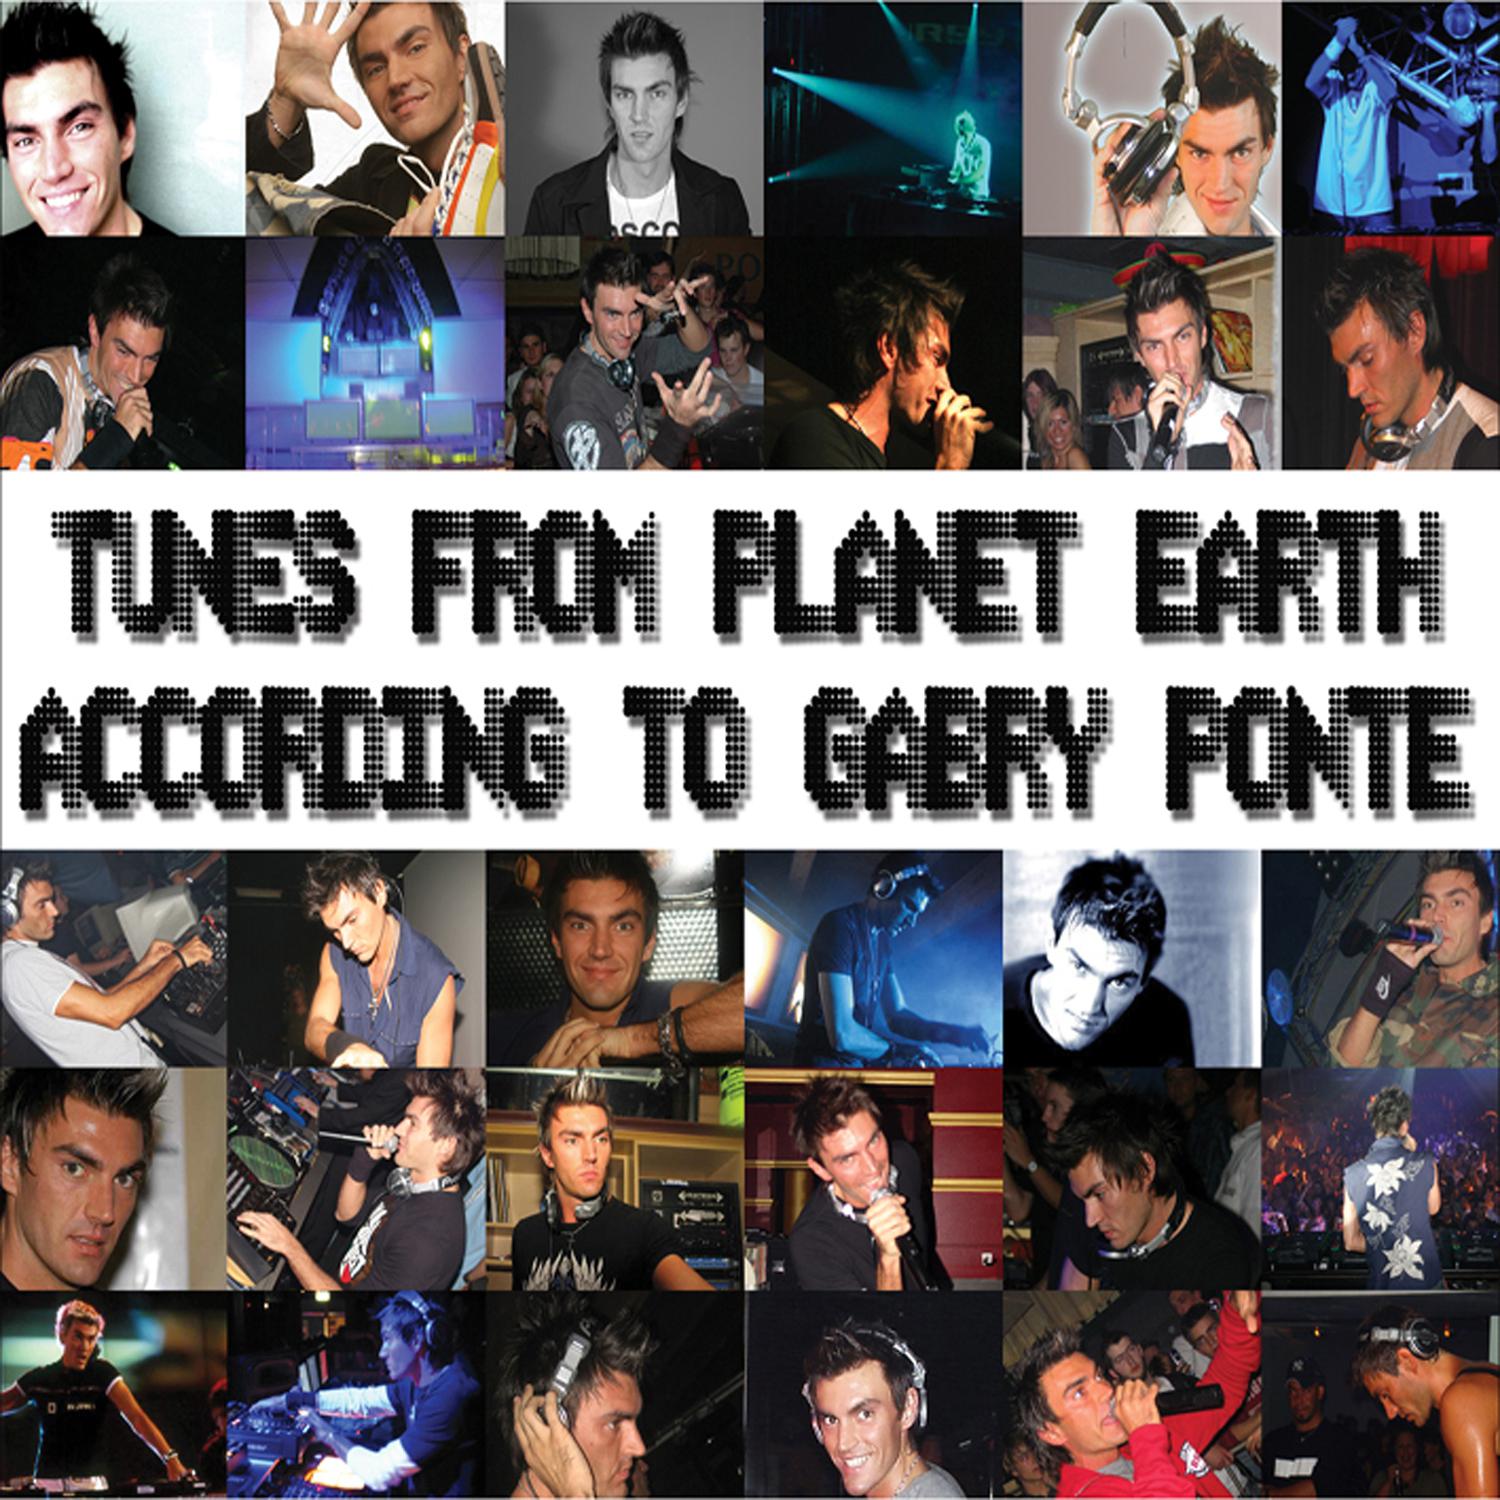 Tunes From Planet Earth According To Gabry Ponte